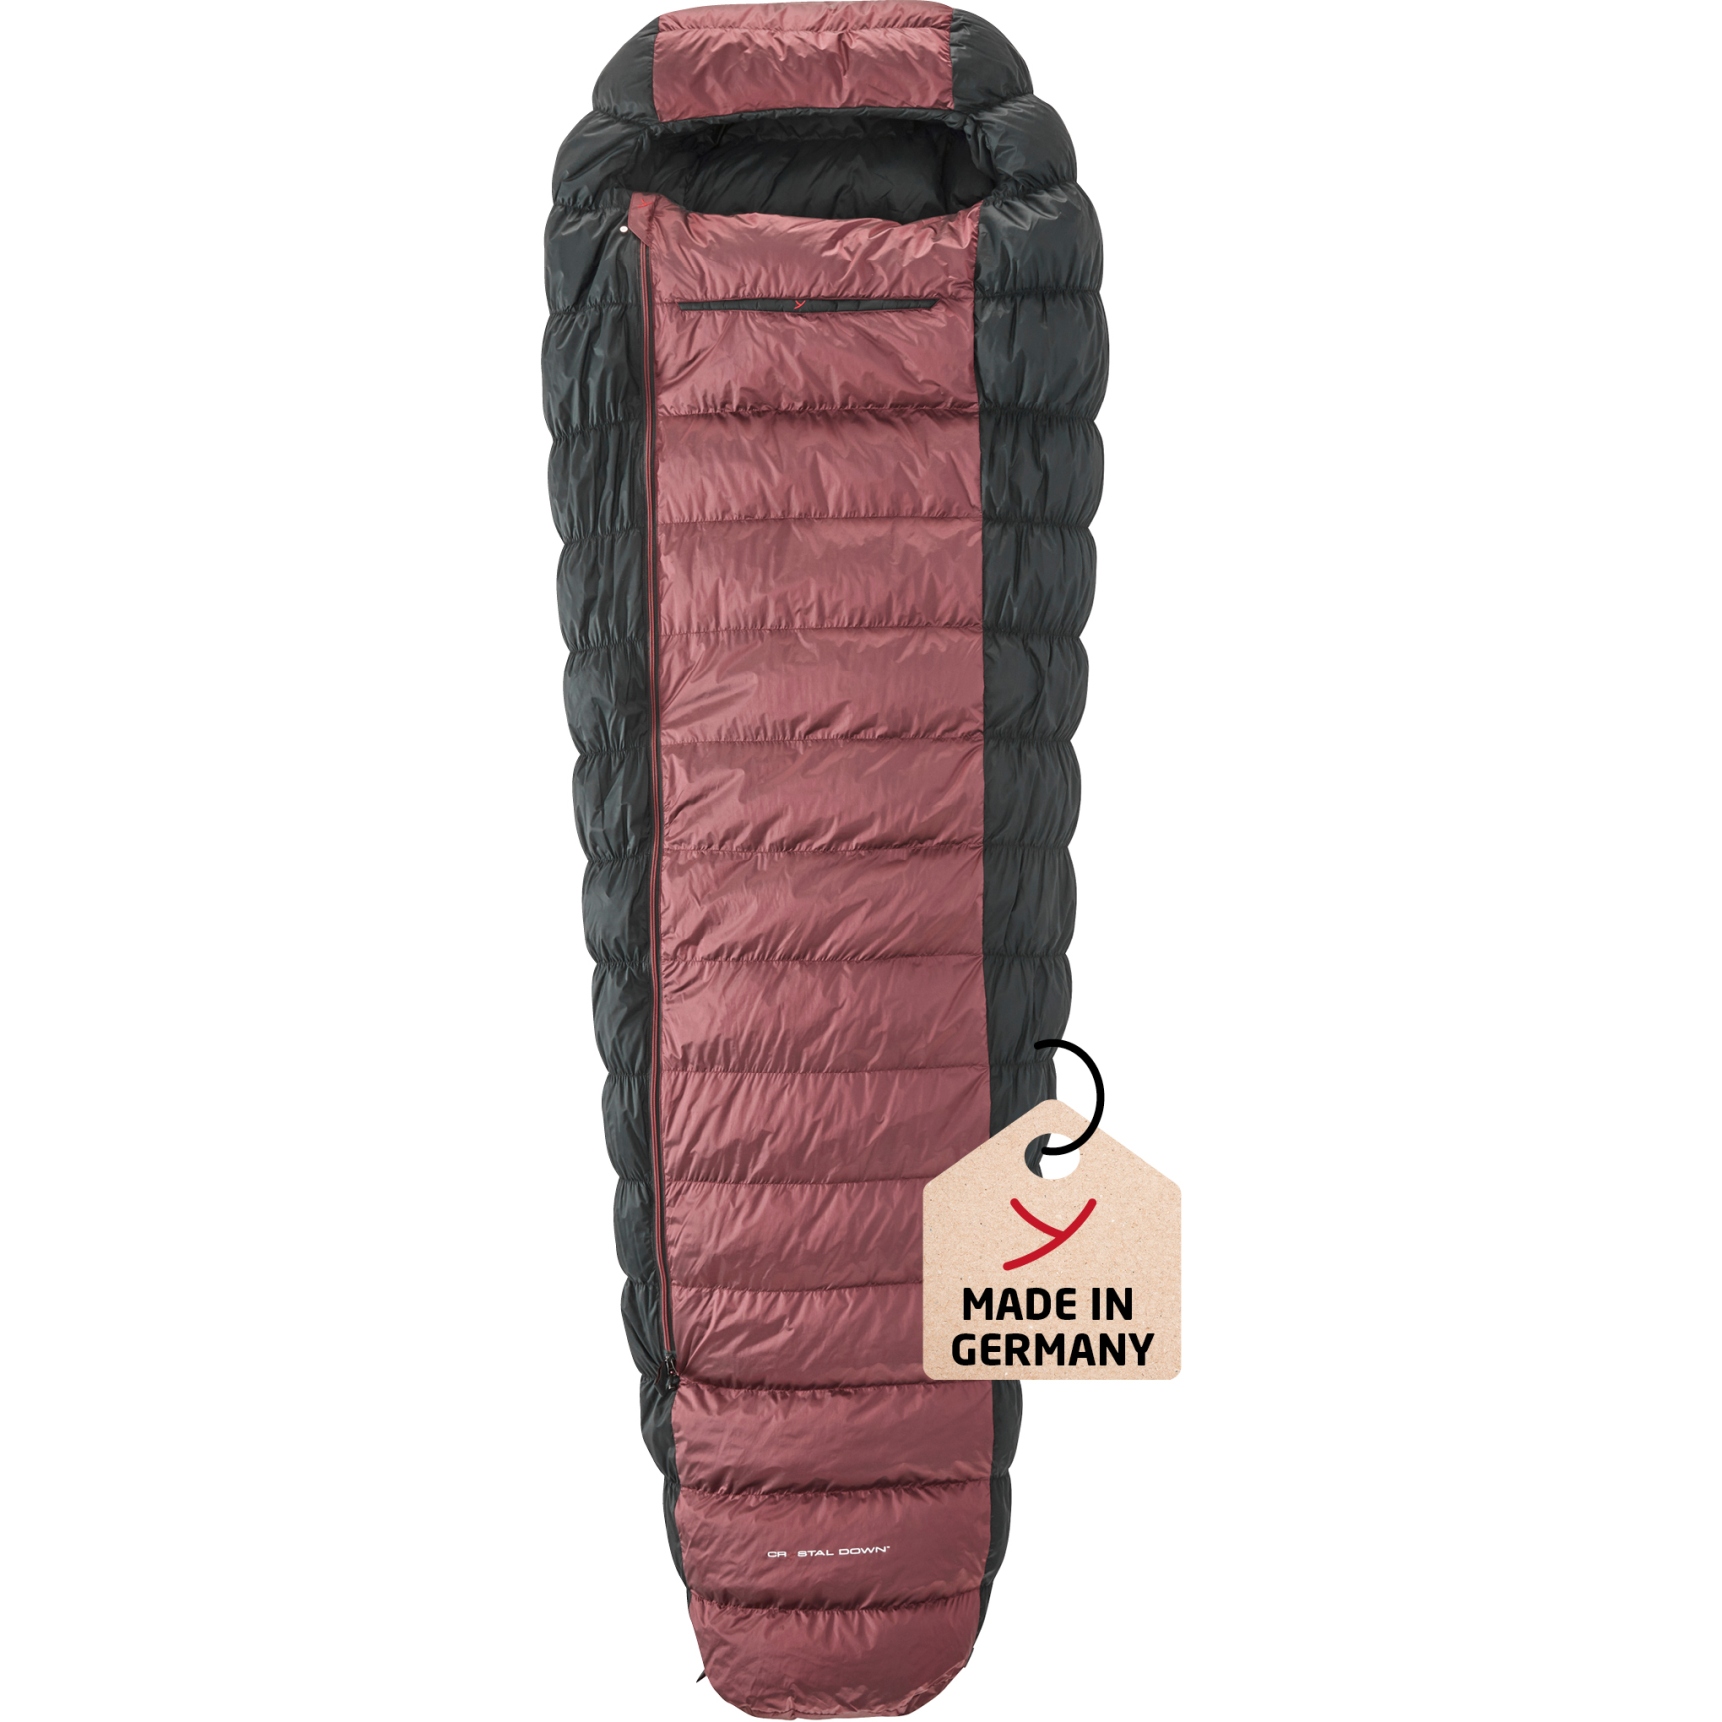 Picture of Y by Nordisk Voyage 500 L Sleeping Bag - ribbon red/black